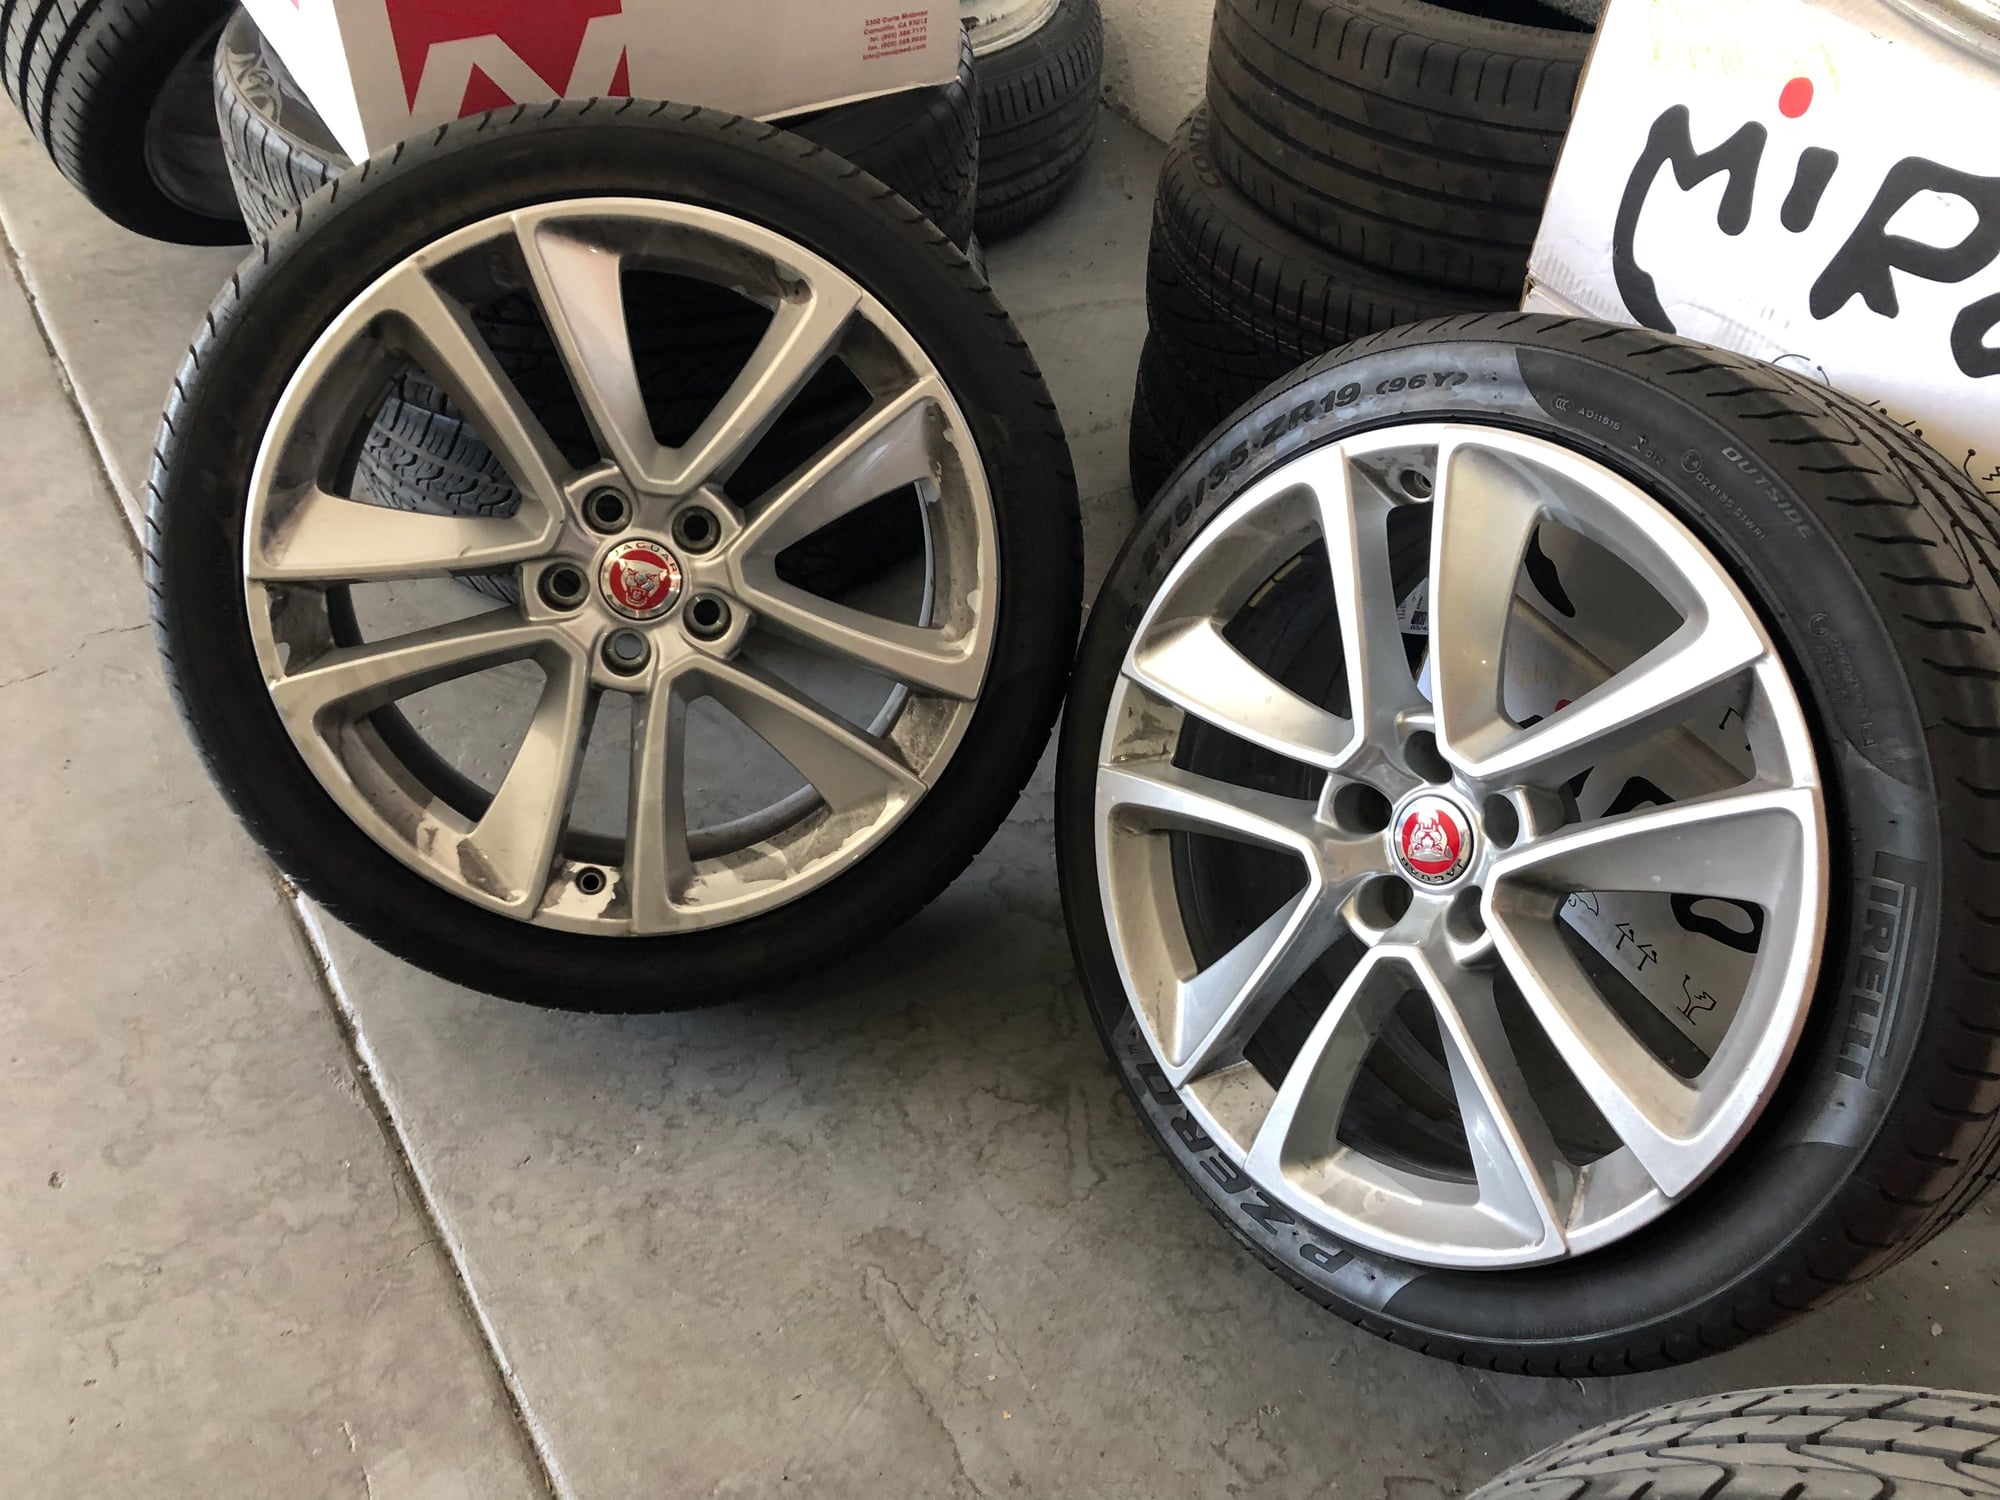 Wheels and Tires/Axles - 19" Wheels, caps and tires-$600 - New - All Years Jaguar F-Type - Reno, NV 89502, United States